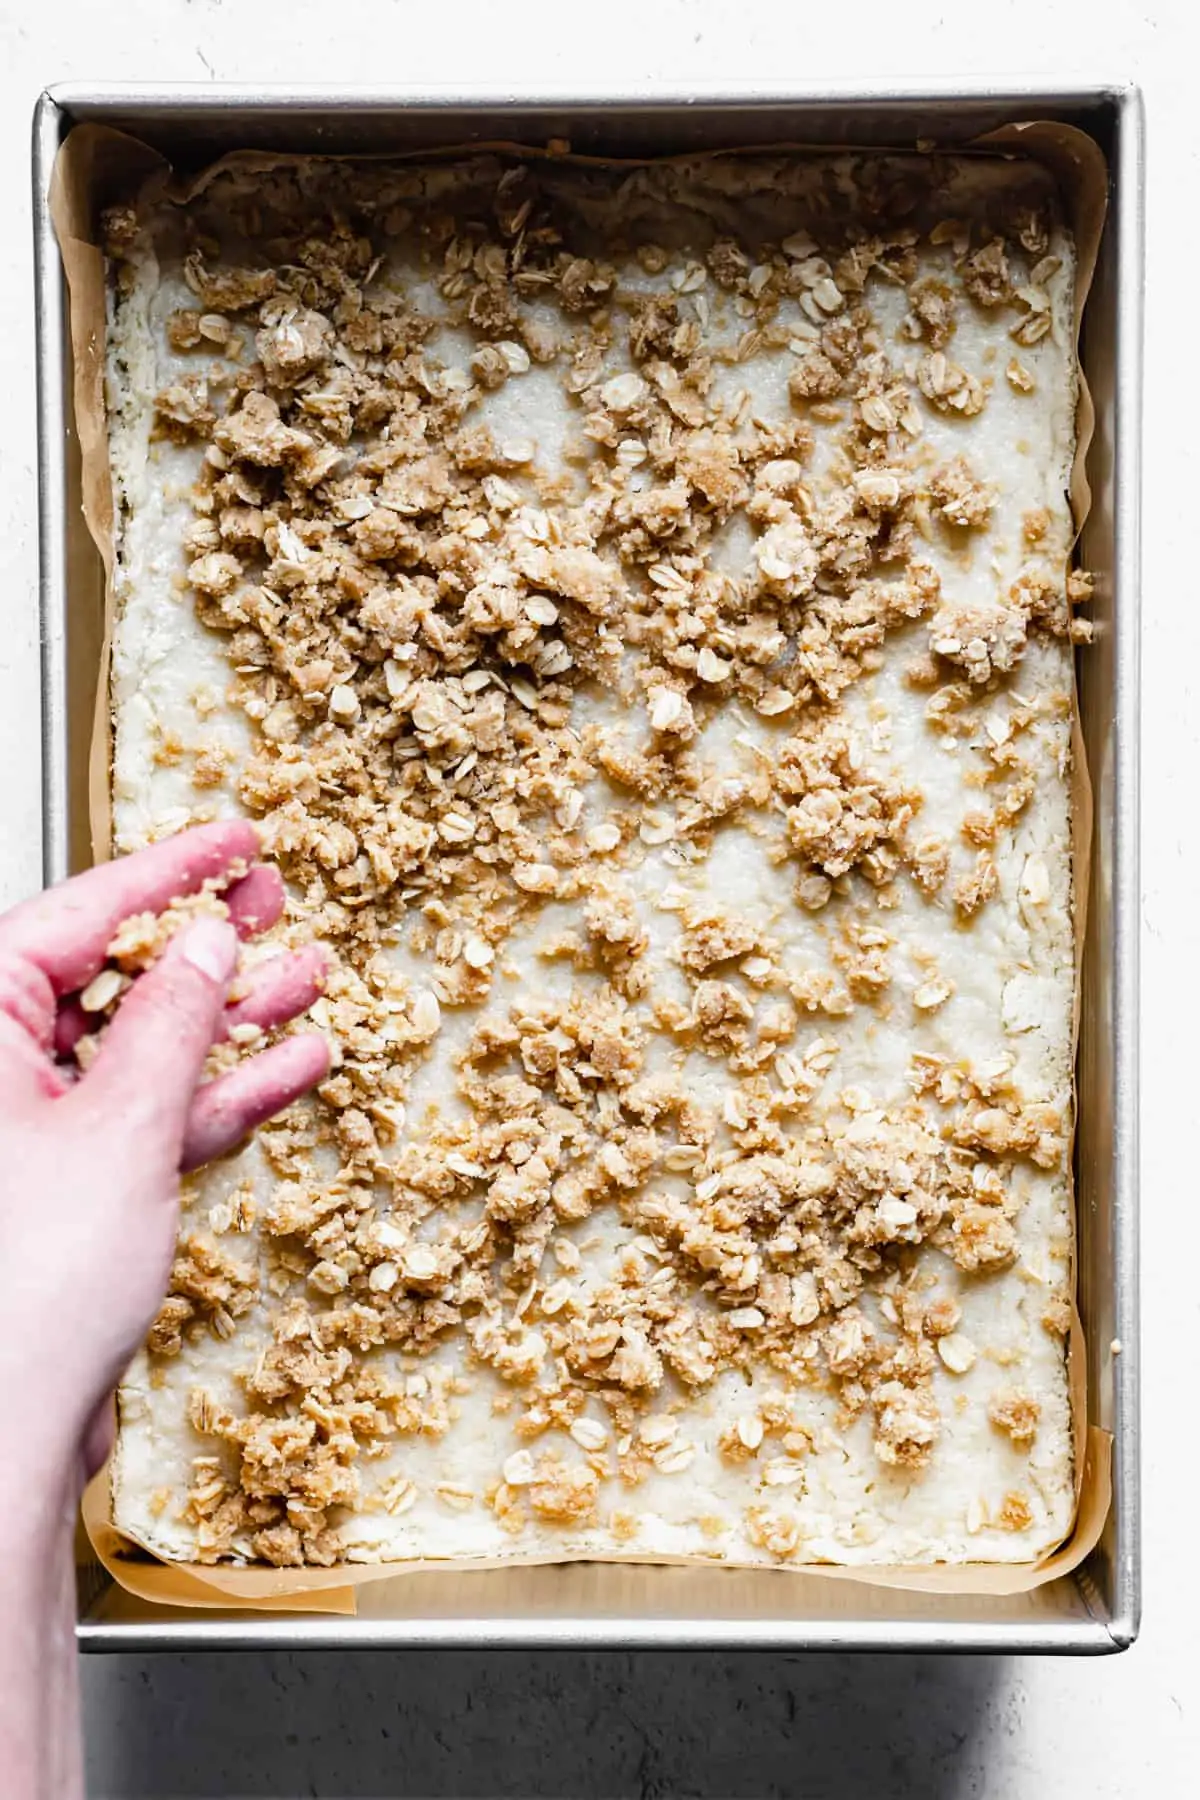 crumble topping gets scattered on the par-baked shortbread base